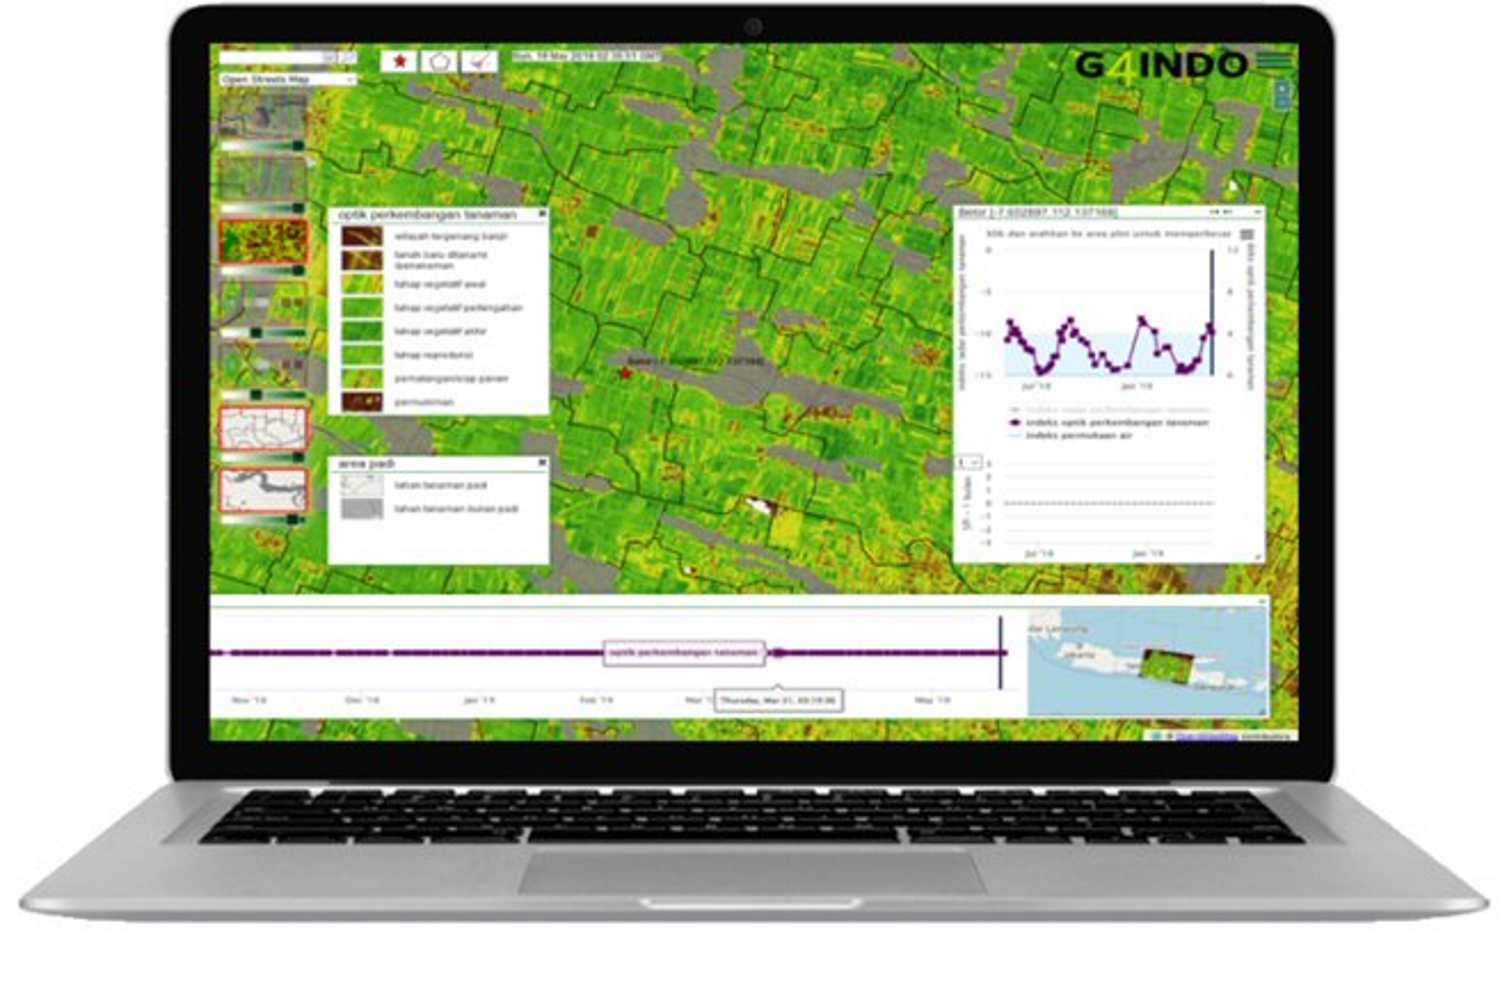 Rice biomass monitoring for Crop Insurance claim checking